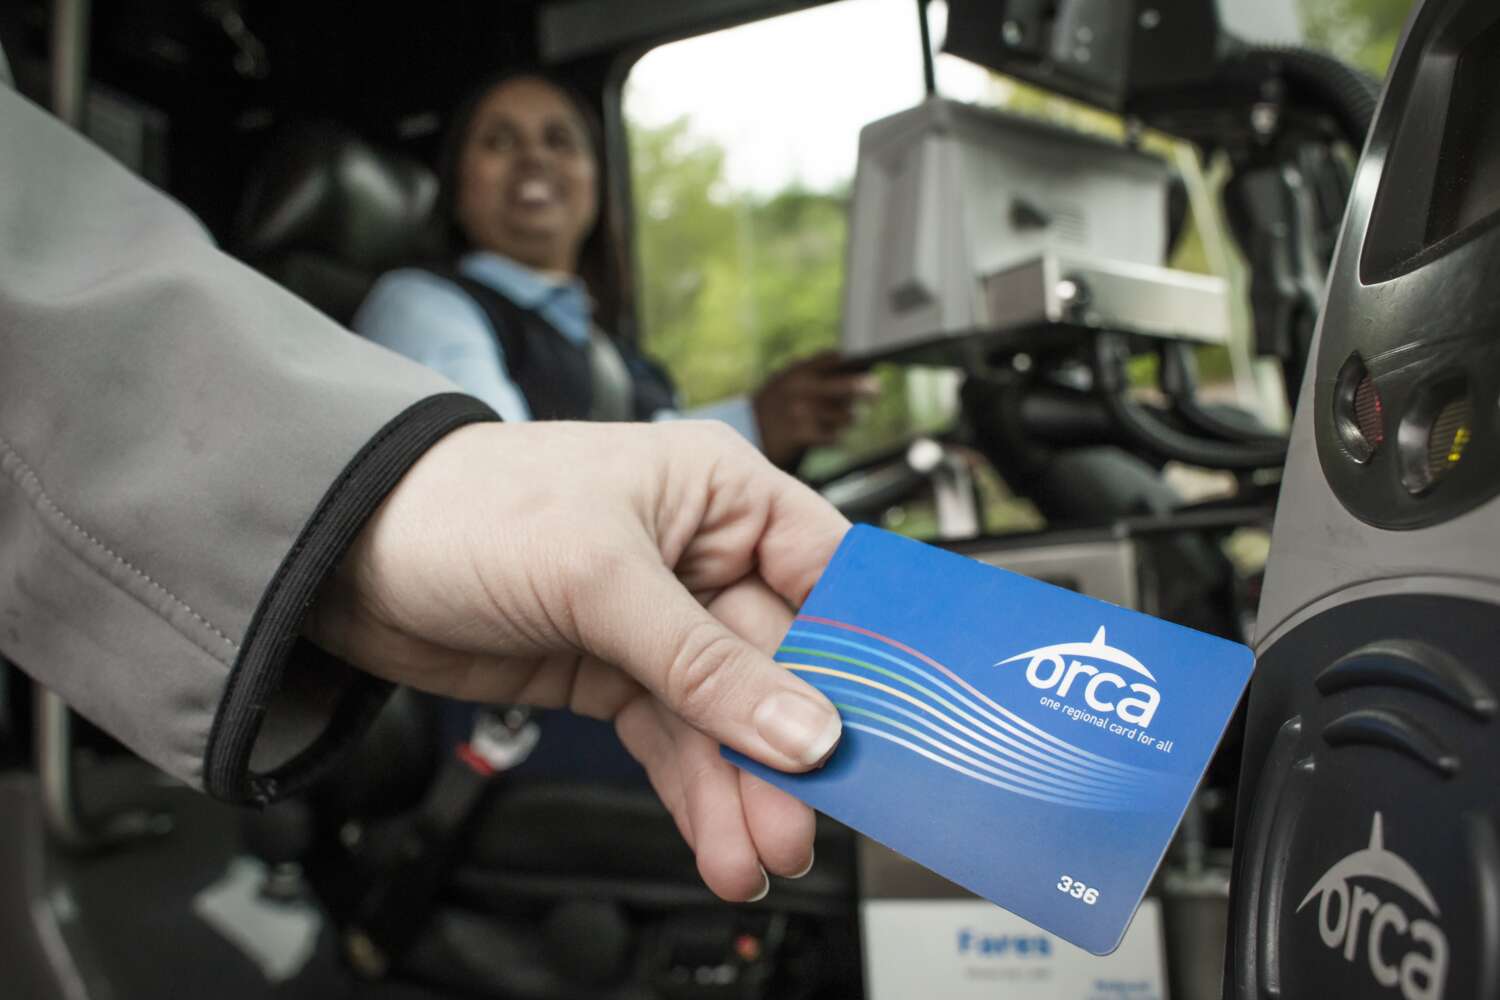 One Regional Card for All (ORCA) cards are accepted on most transit buses in the region and on Sounder, light rail, Seattle Streetcars, Washington State Ferries, and other transit options.